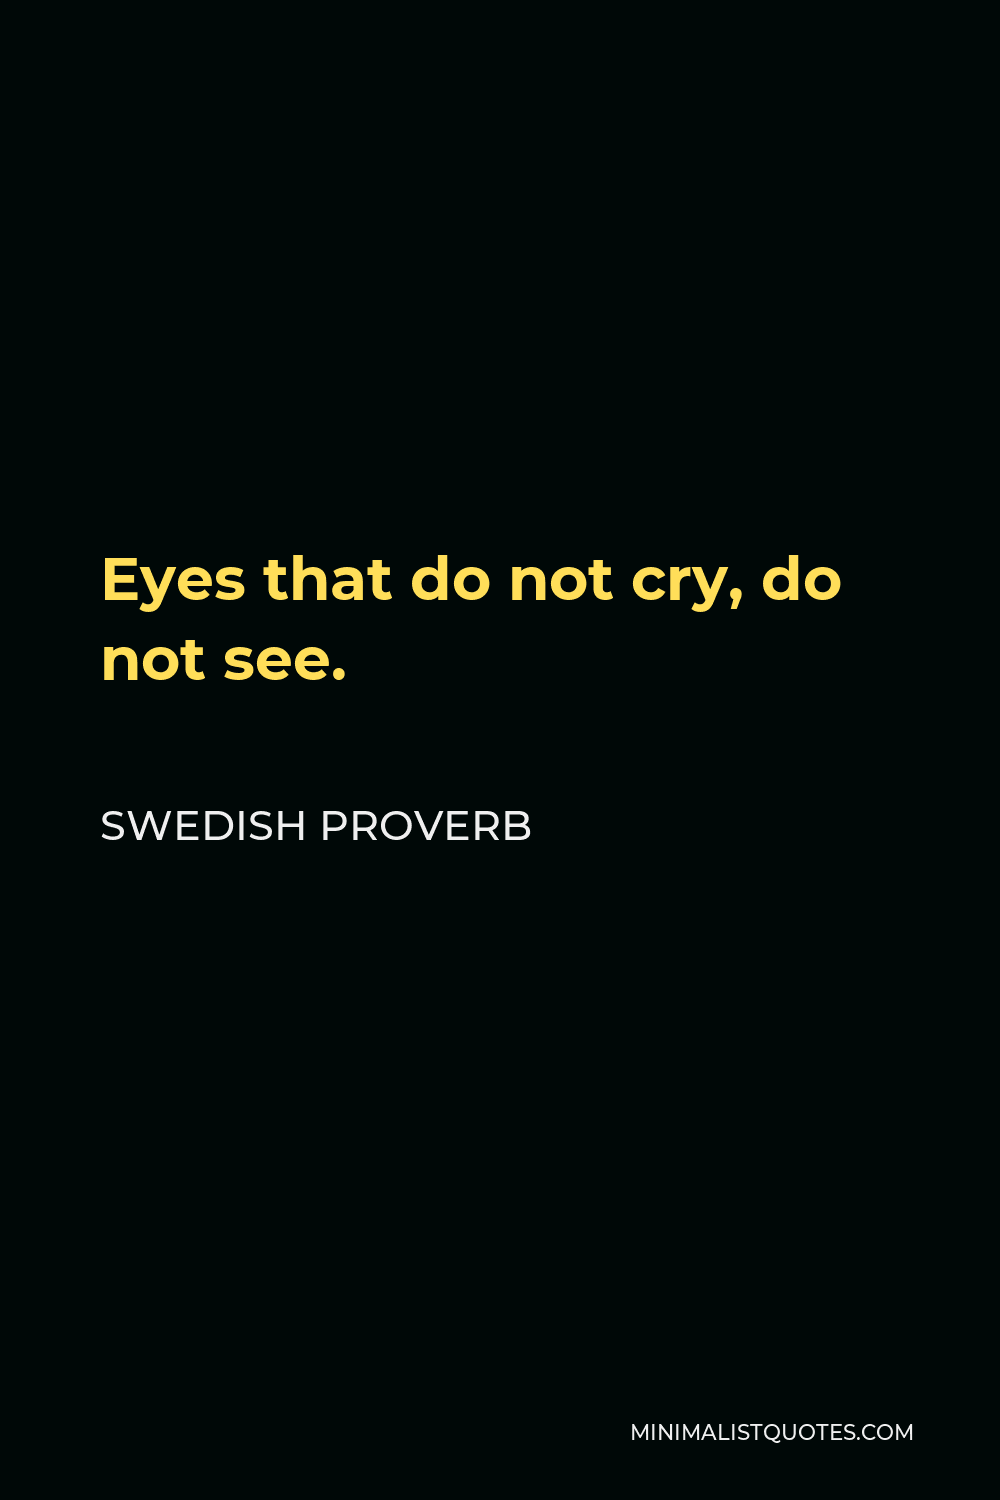 Swedish Proverb Quote - Eyes that do not cry, do not see.